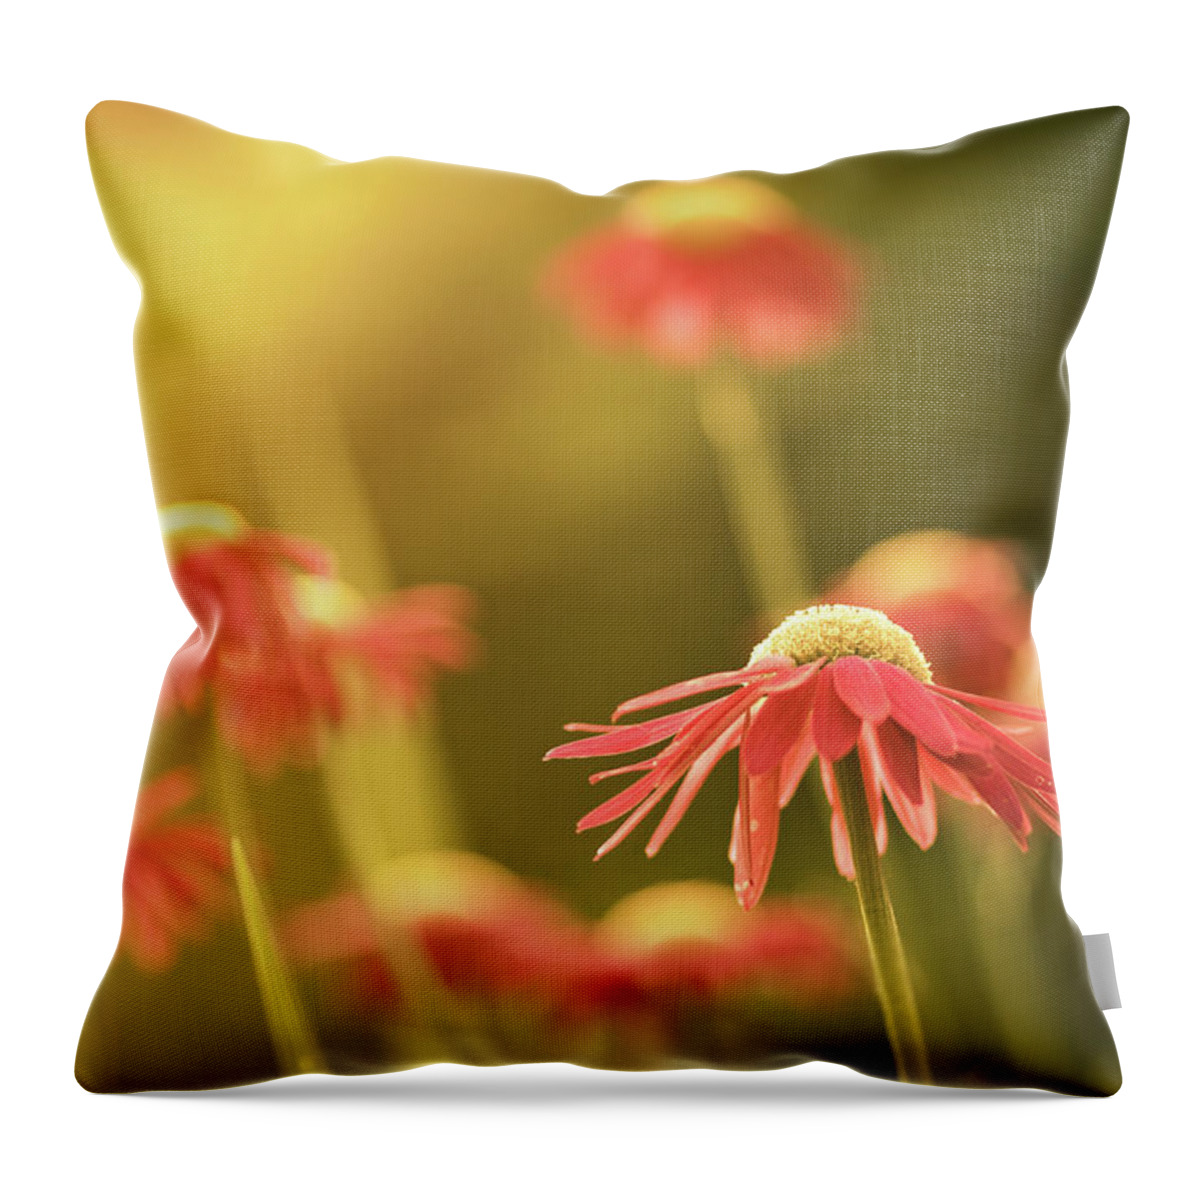 Outdoors Throw Pillow featuring the photograph Red Cone Flowers In Golden Sunlight by Jp Benante